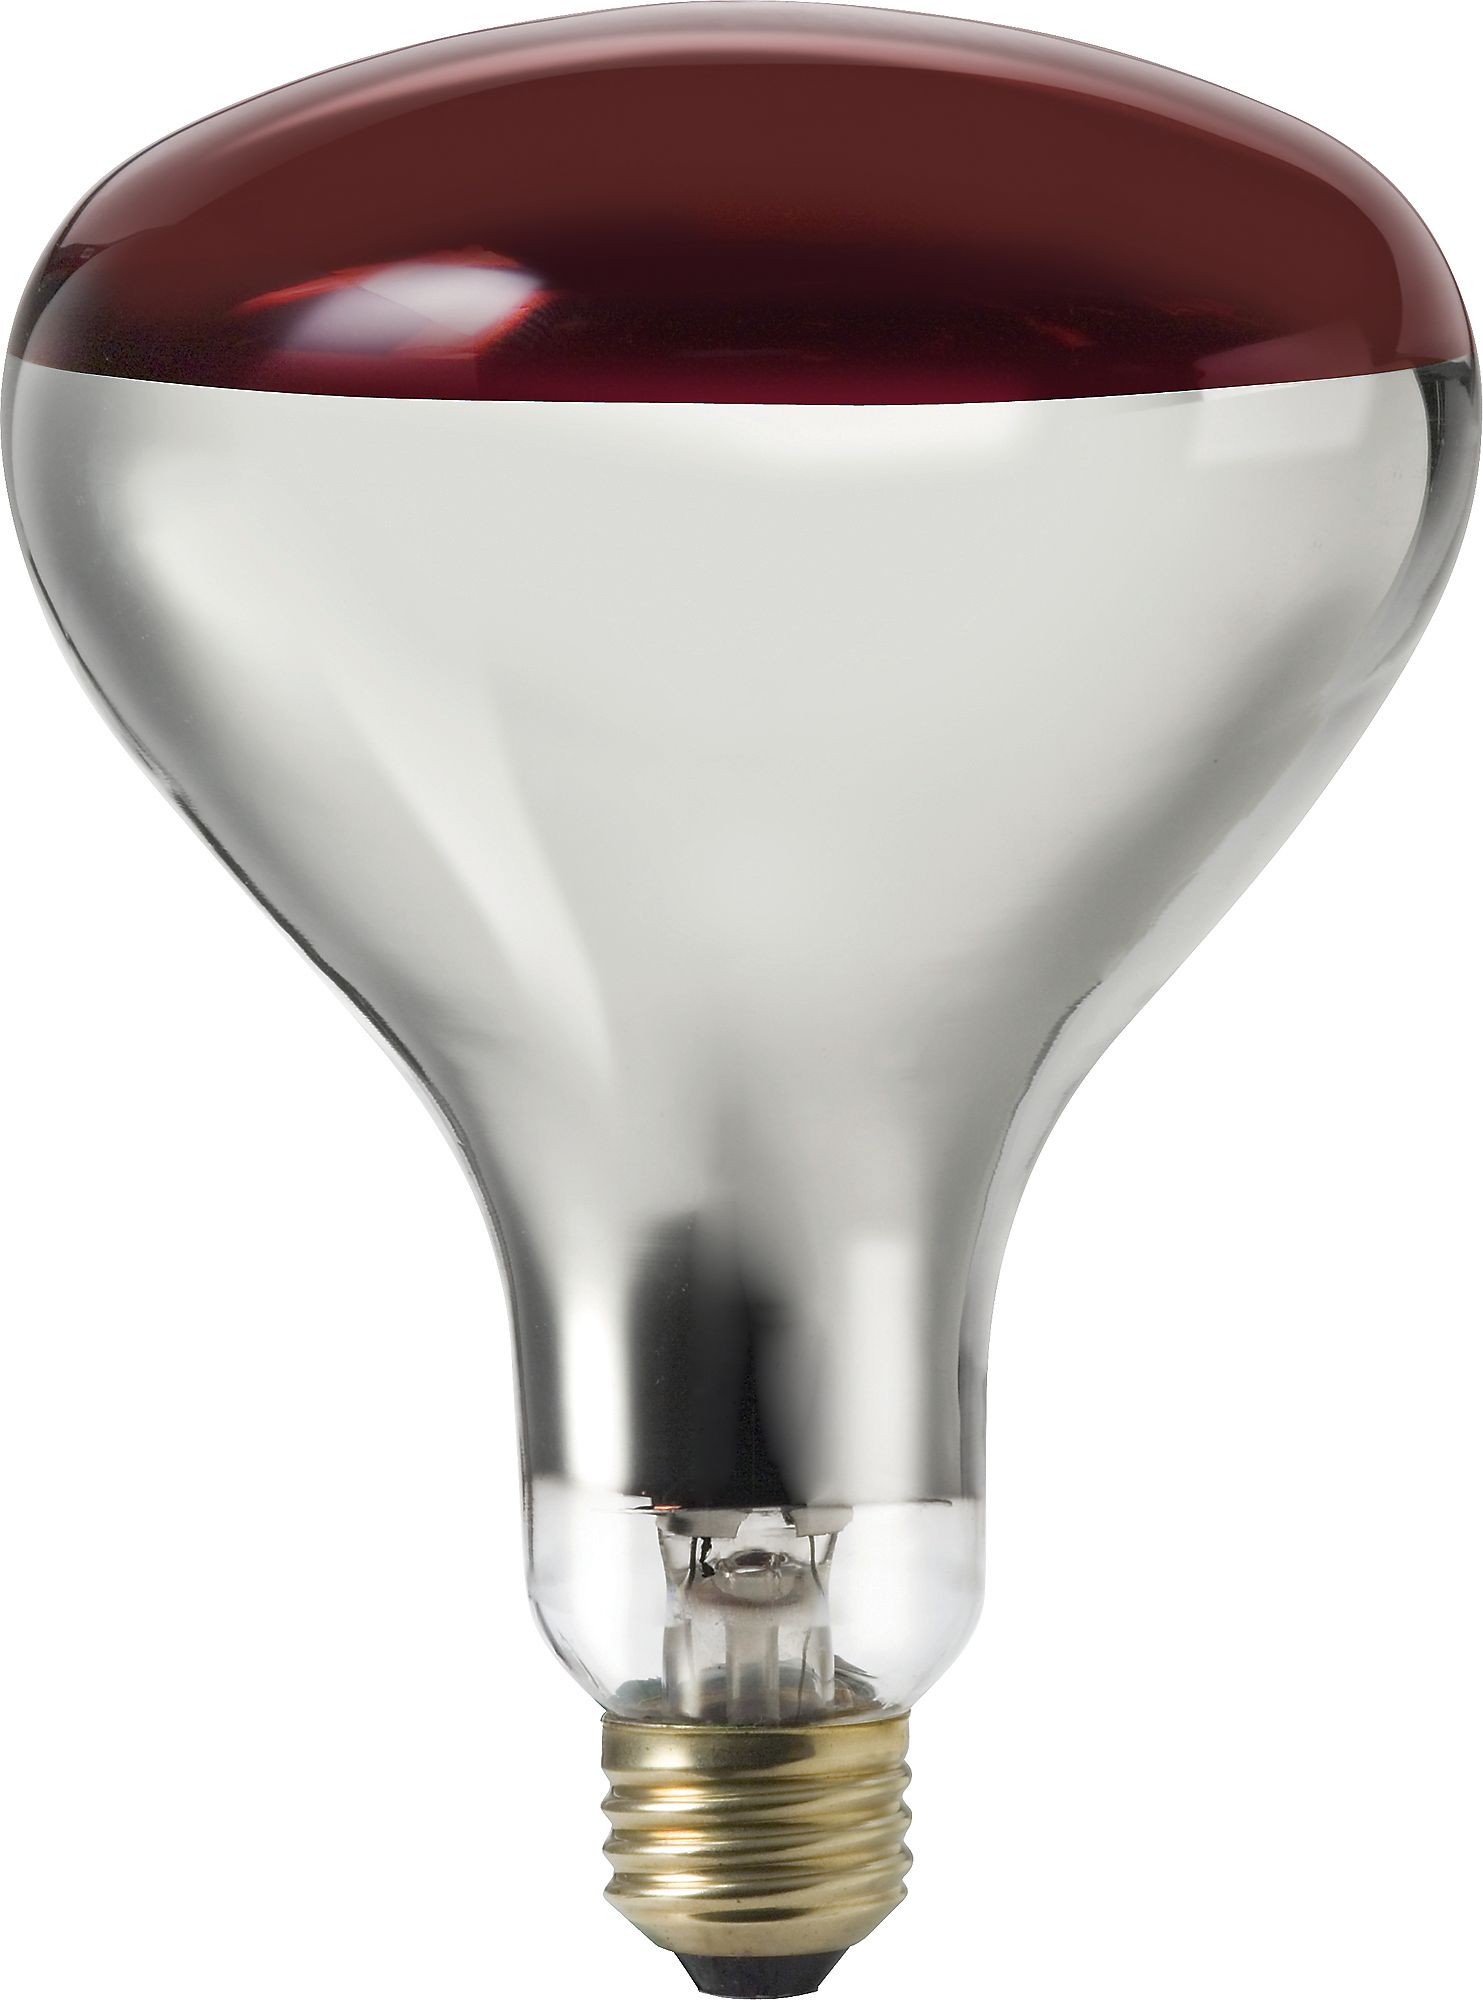 159327 (250R40/HR/TG 4/1) Coated Incandescent Lamp Philips Lighting;Signify Lamps